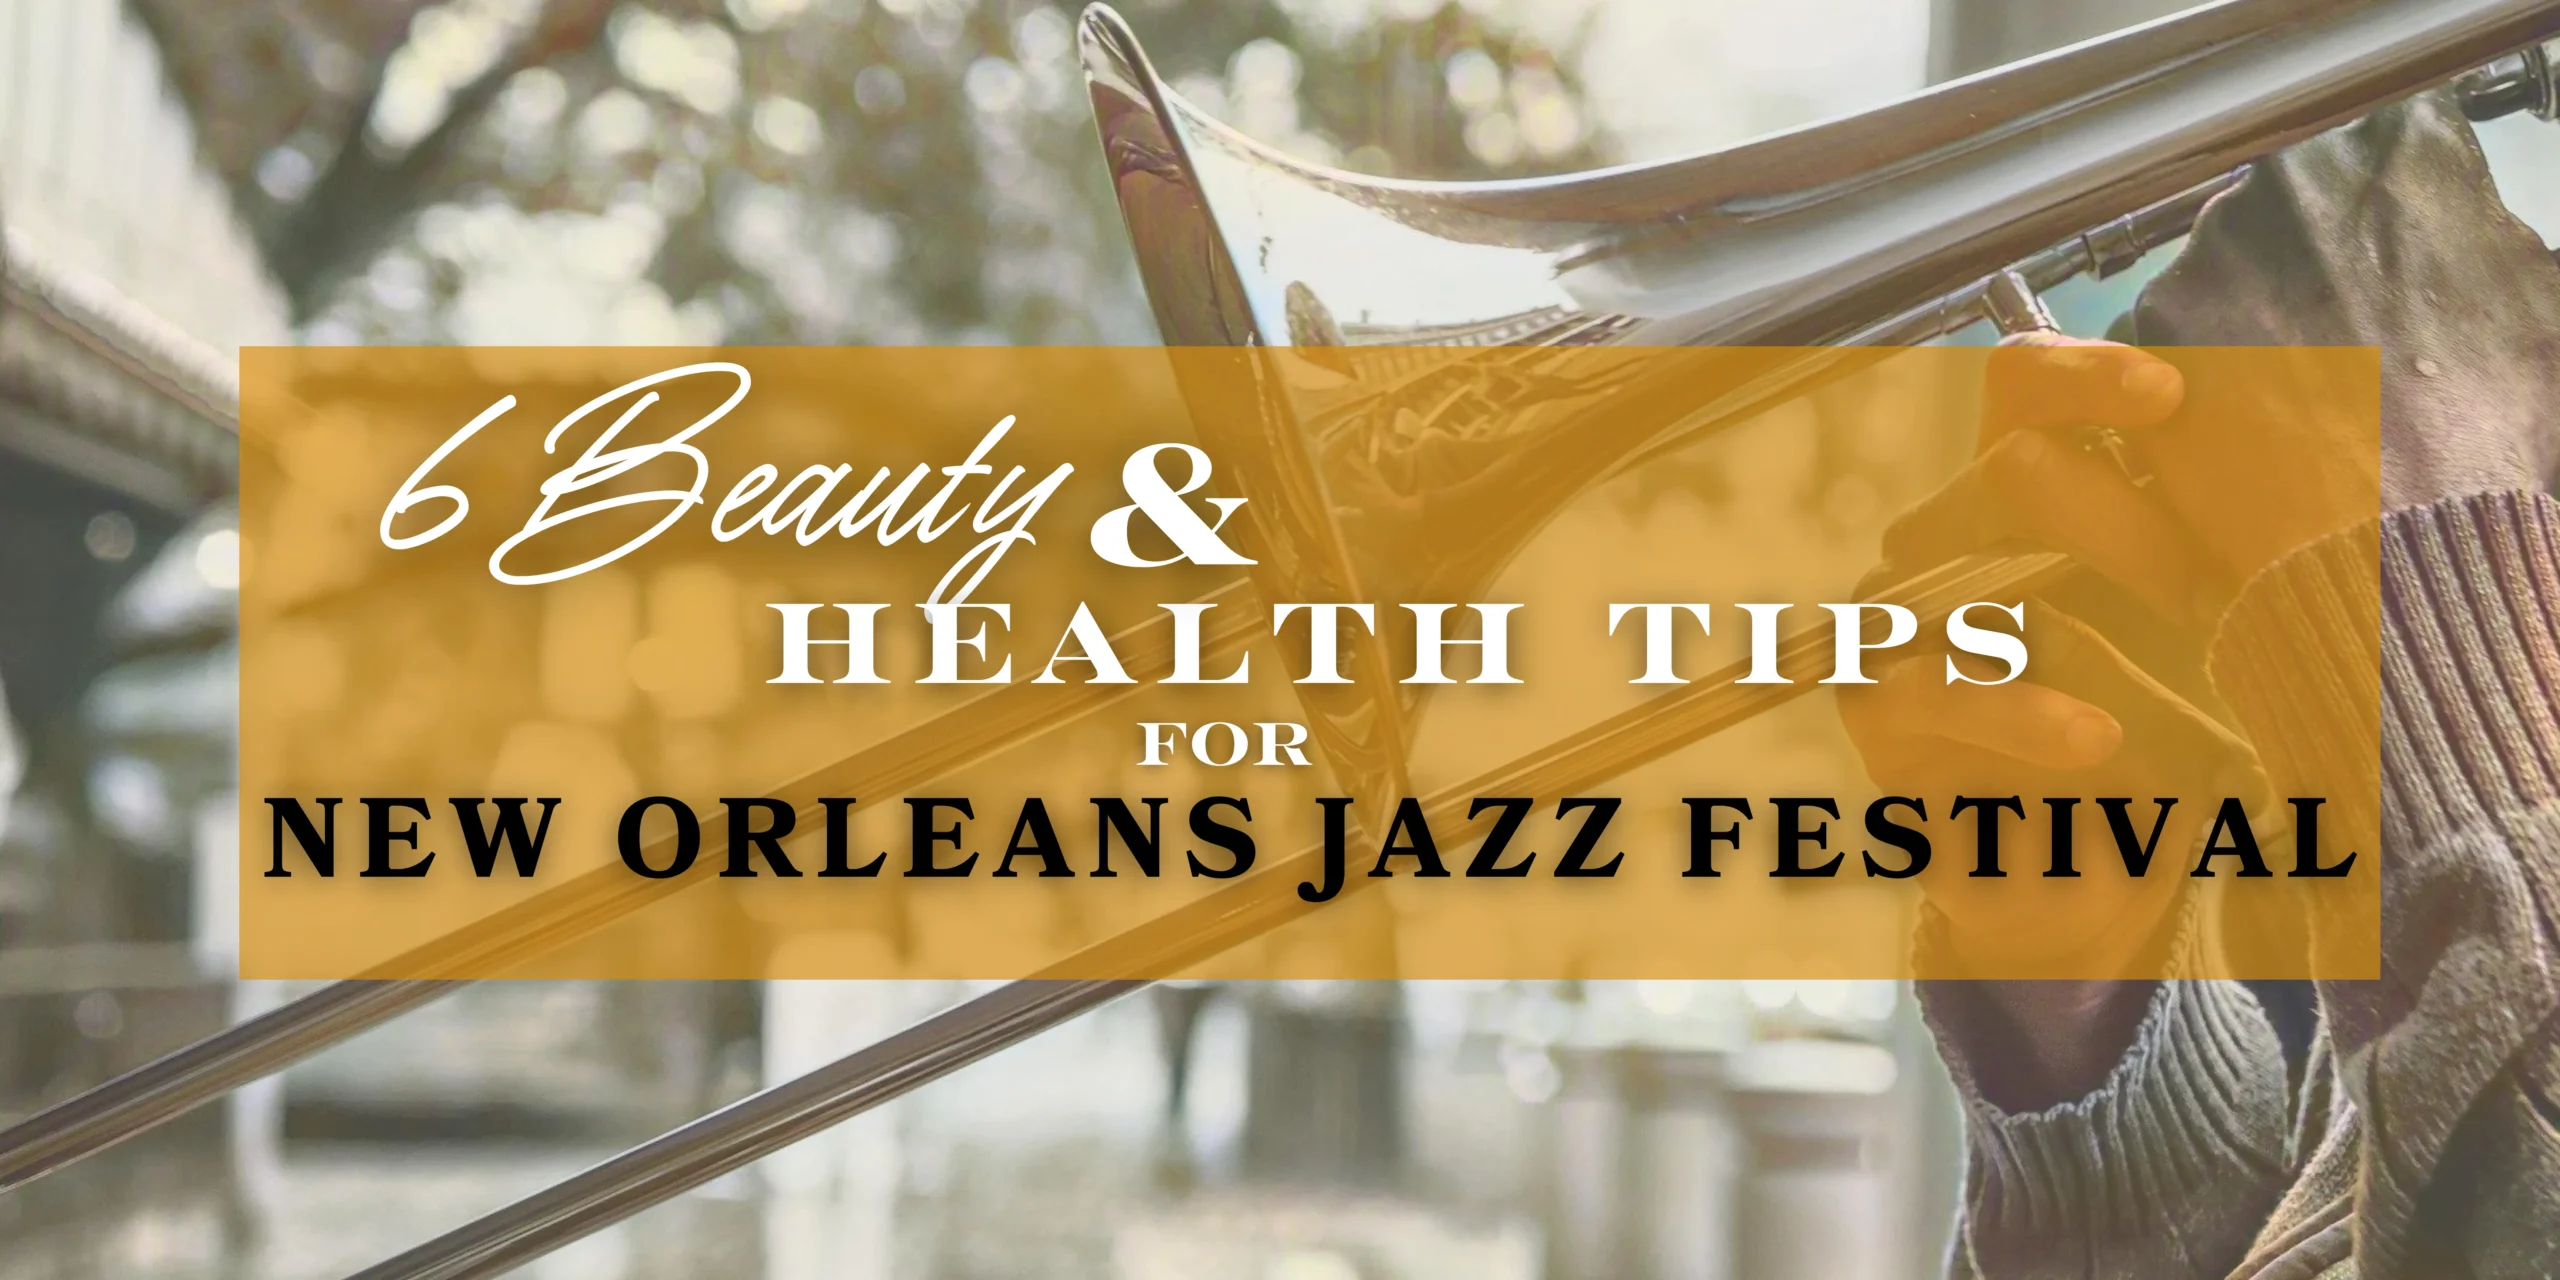 Jazz trumpet player performing at New Orleans festival, embodying beauty and health tips.